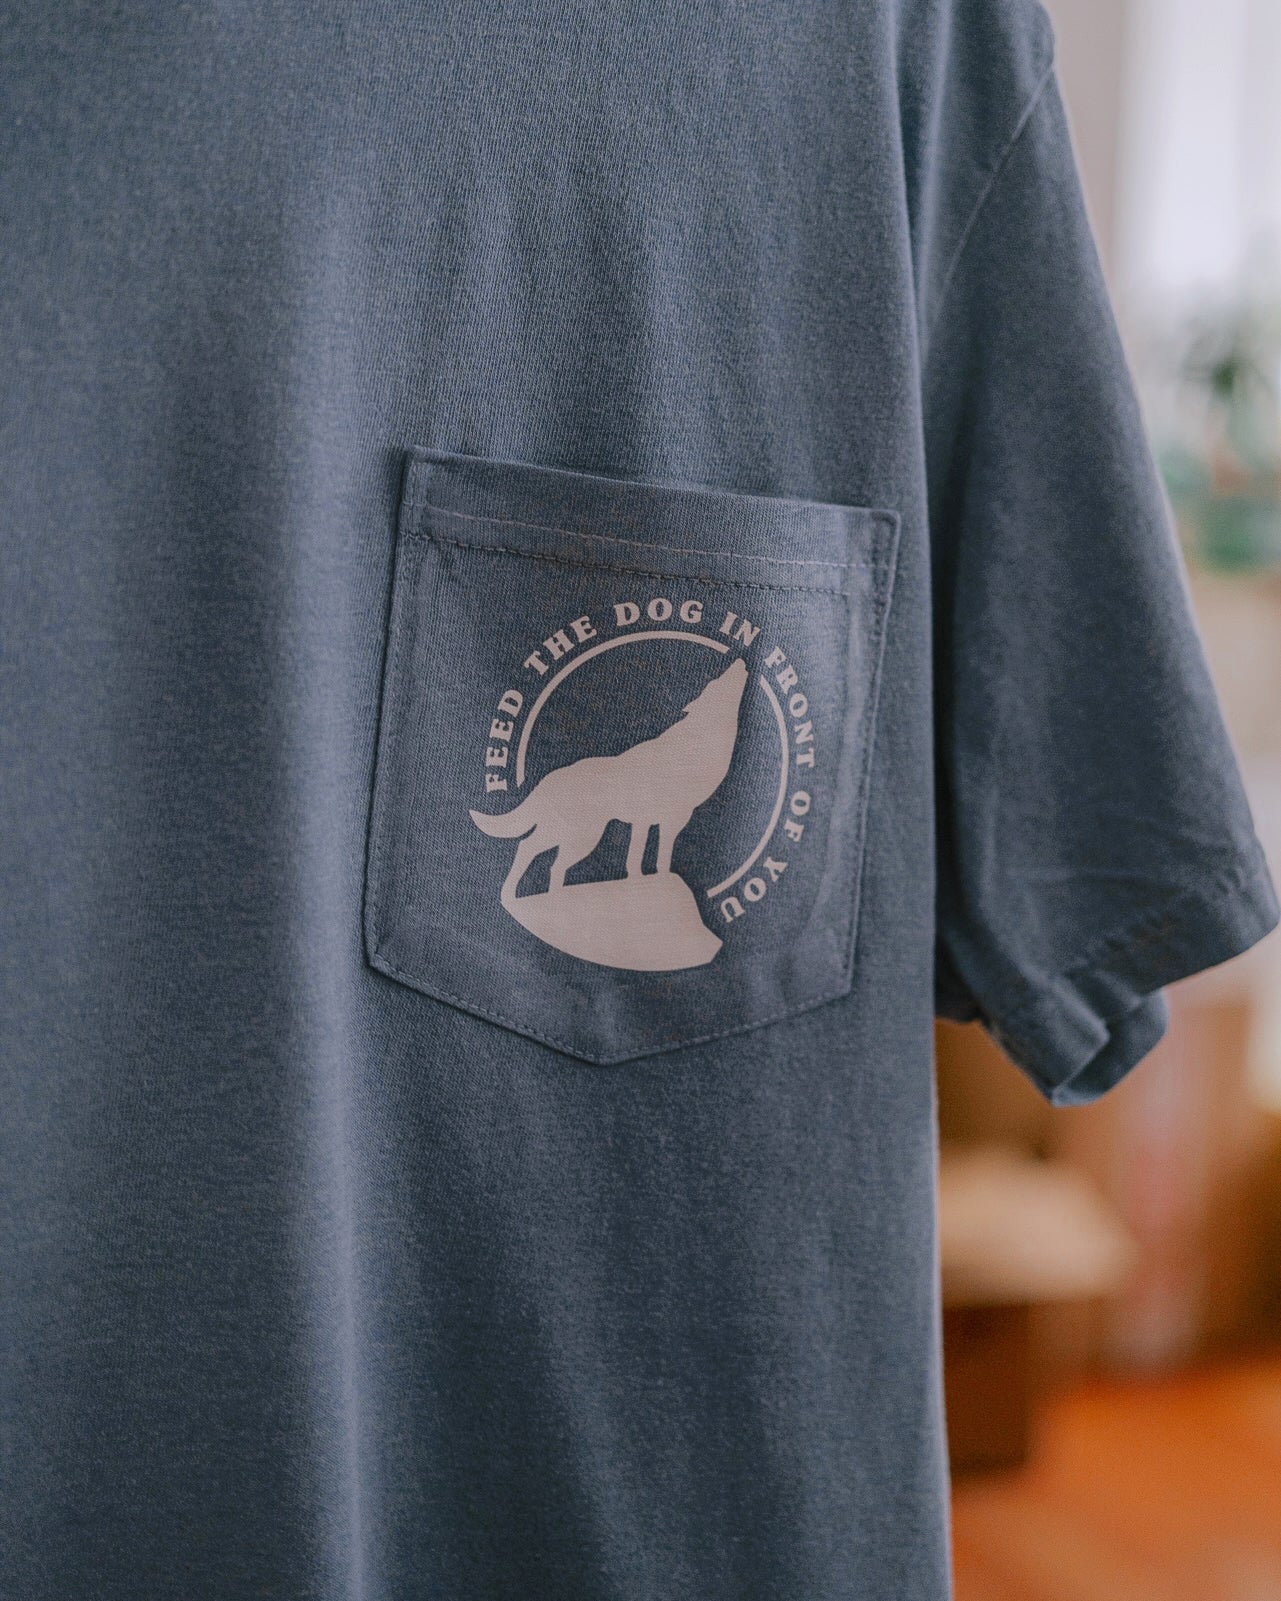 Feed The Dog In Front Of You Pocket Tee